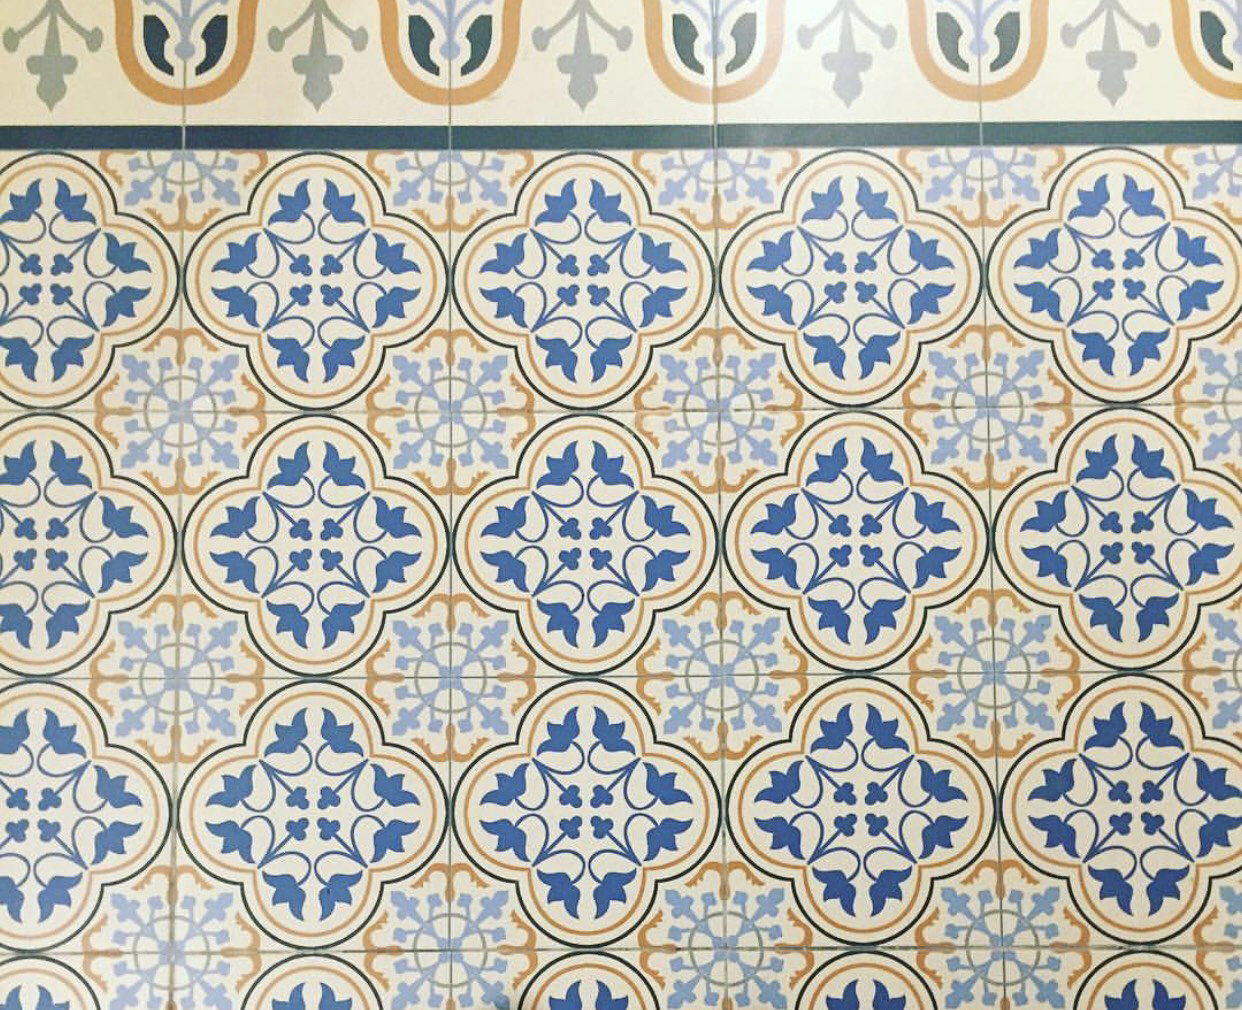 This is how traditional Maltese tiles are made - RE/MAX Malta